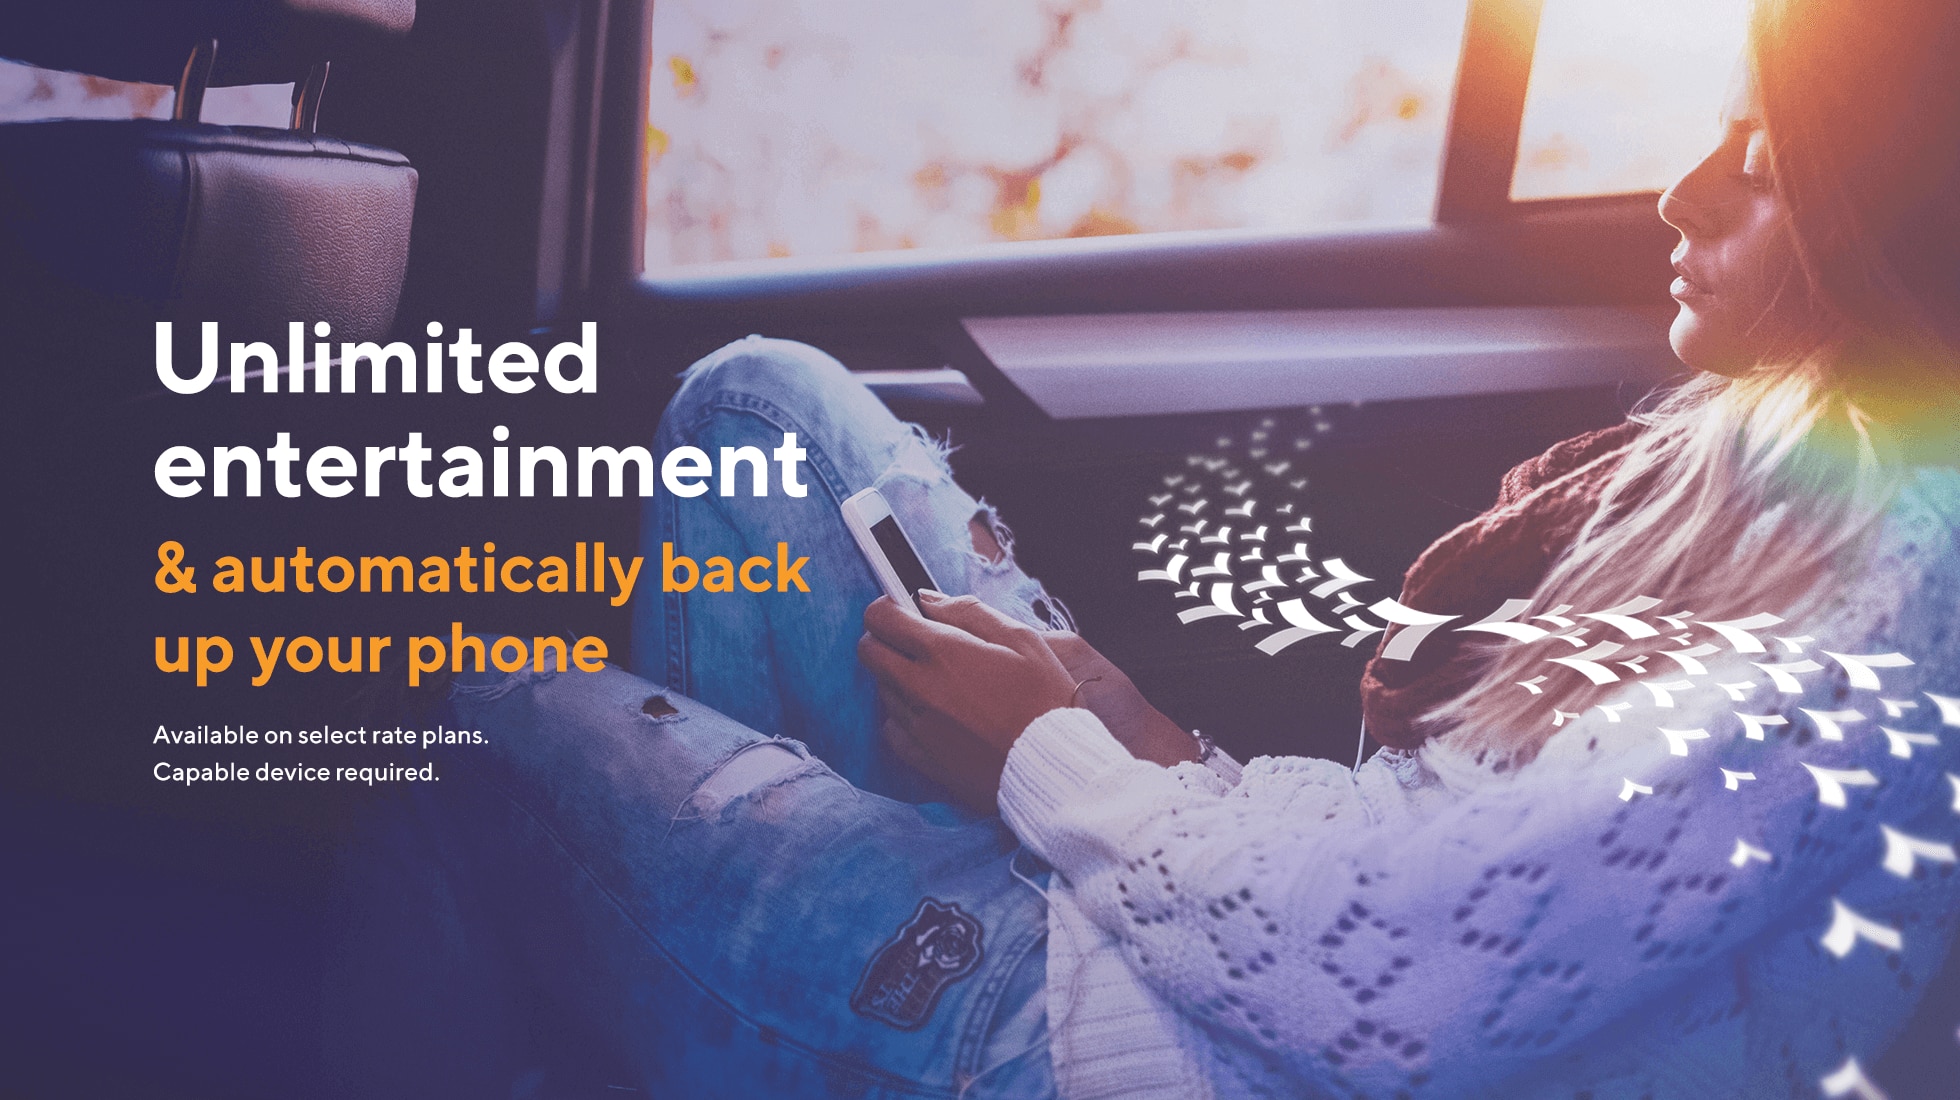 Unlimited entertainment and automatically back up your phone